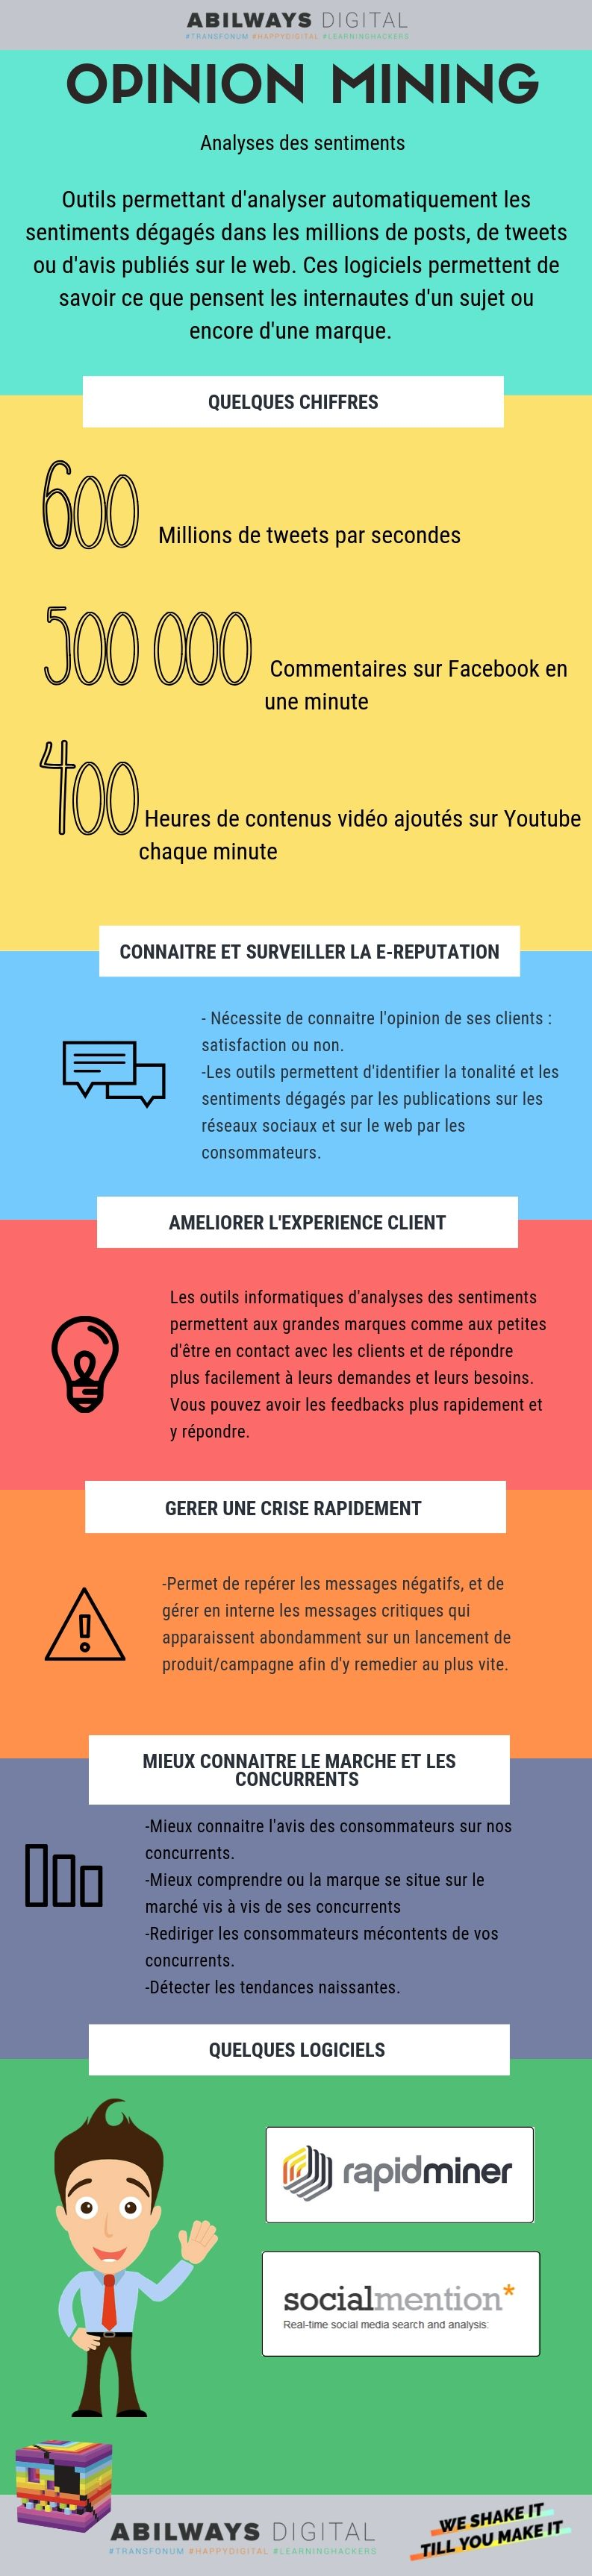 INFOGRAPHIE OPINION MINING 